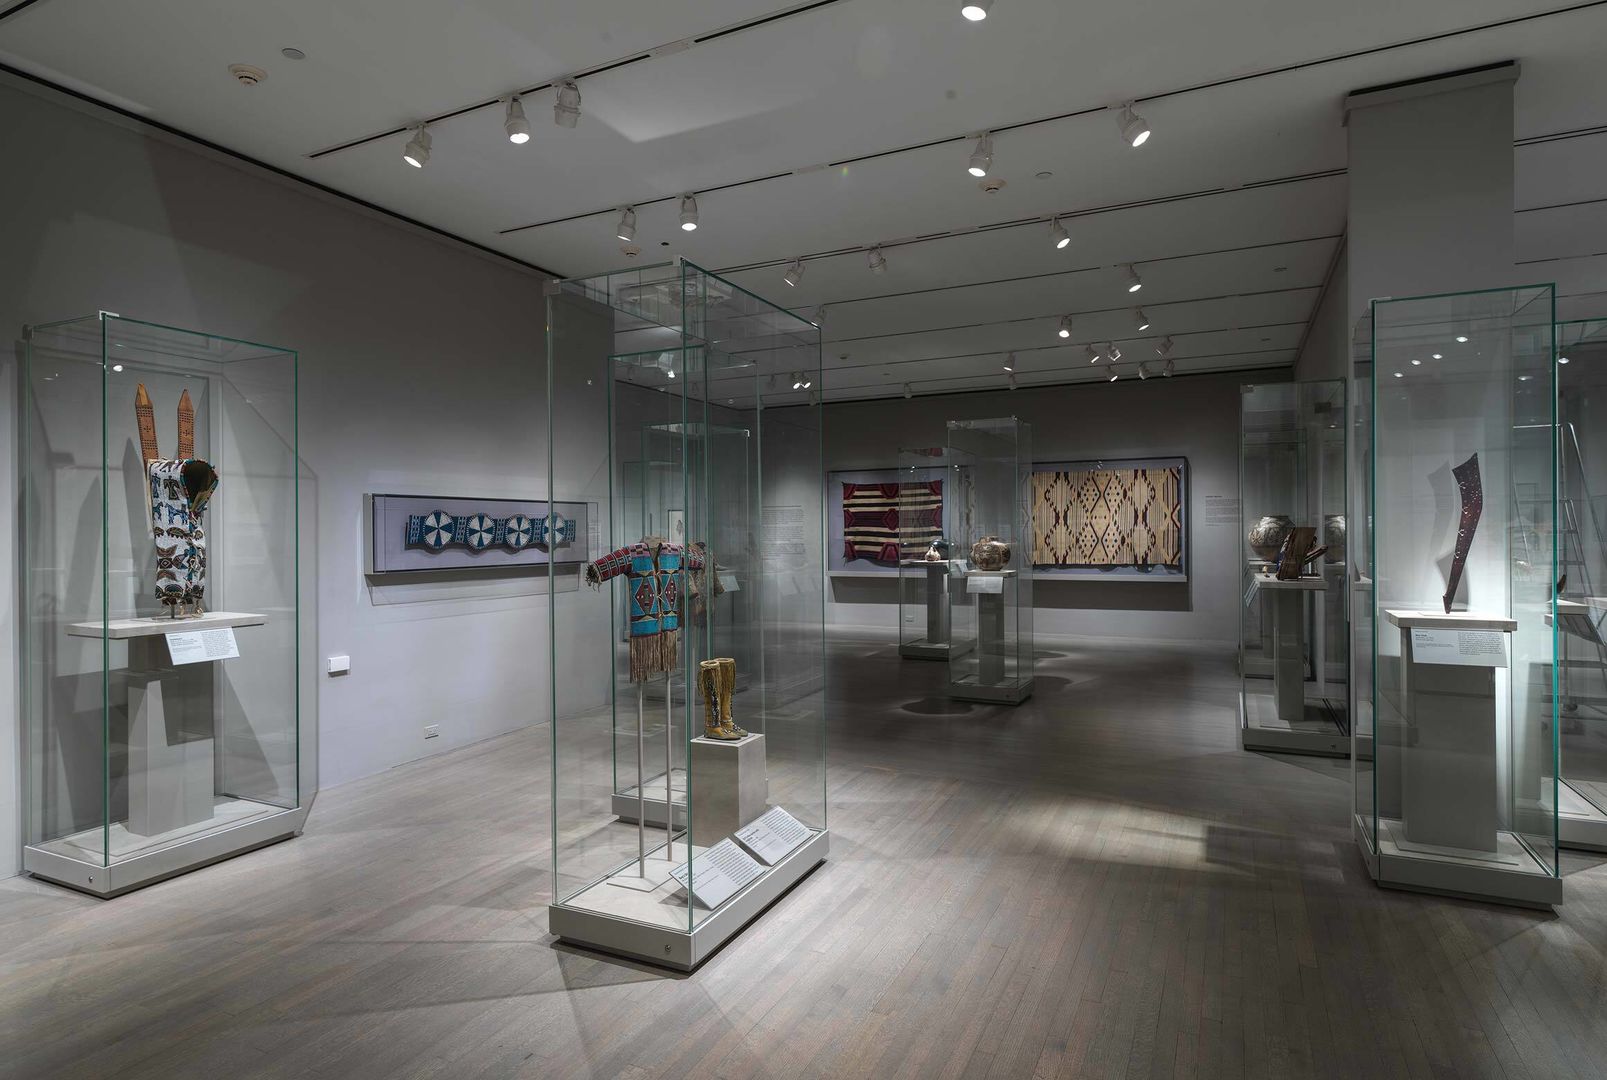 An installation view of The Met's galleries